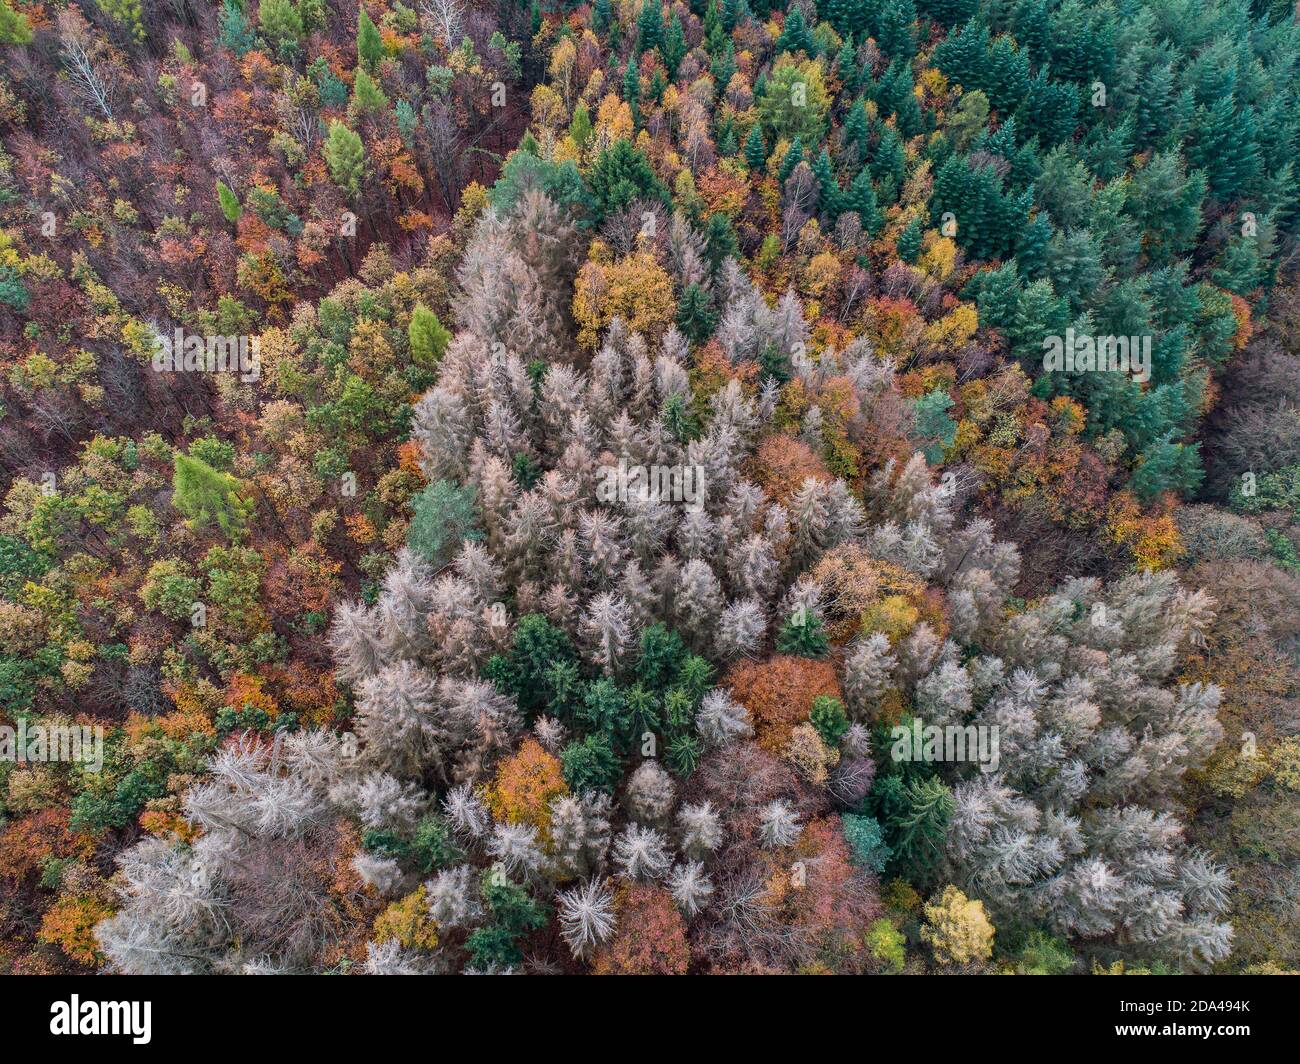 Aerial view green, orange and red autumn forest, with bark beatle infected dead trees different colors germany rhineland palantino Stock Photo